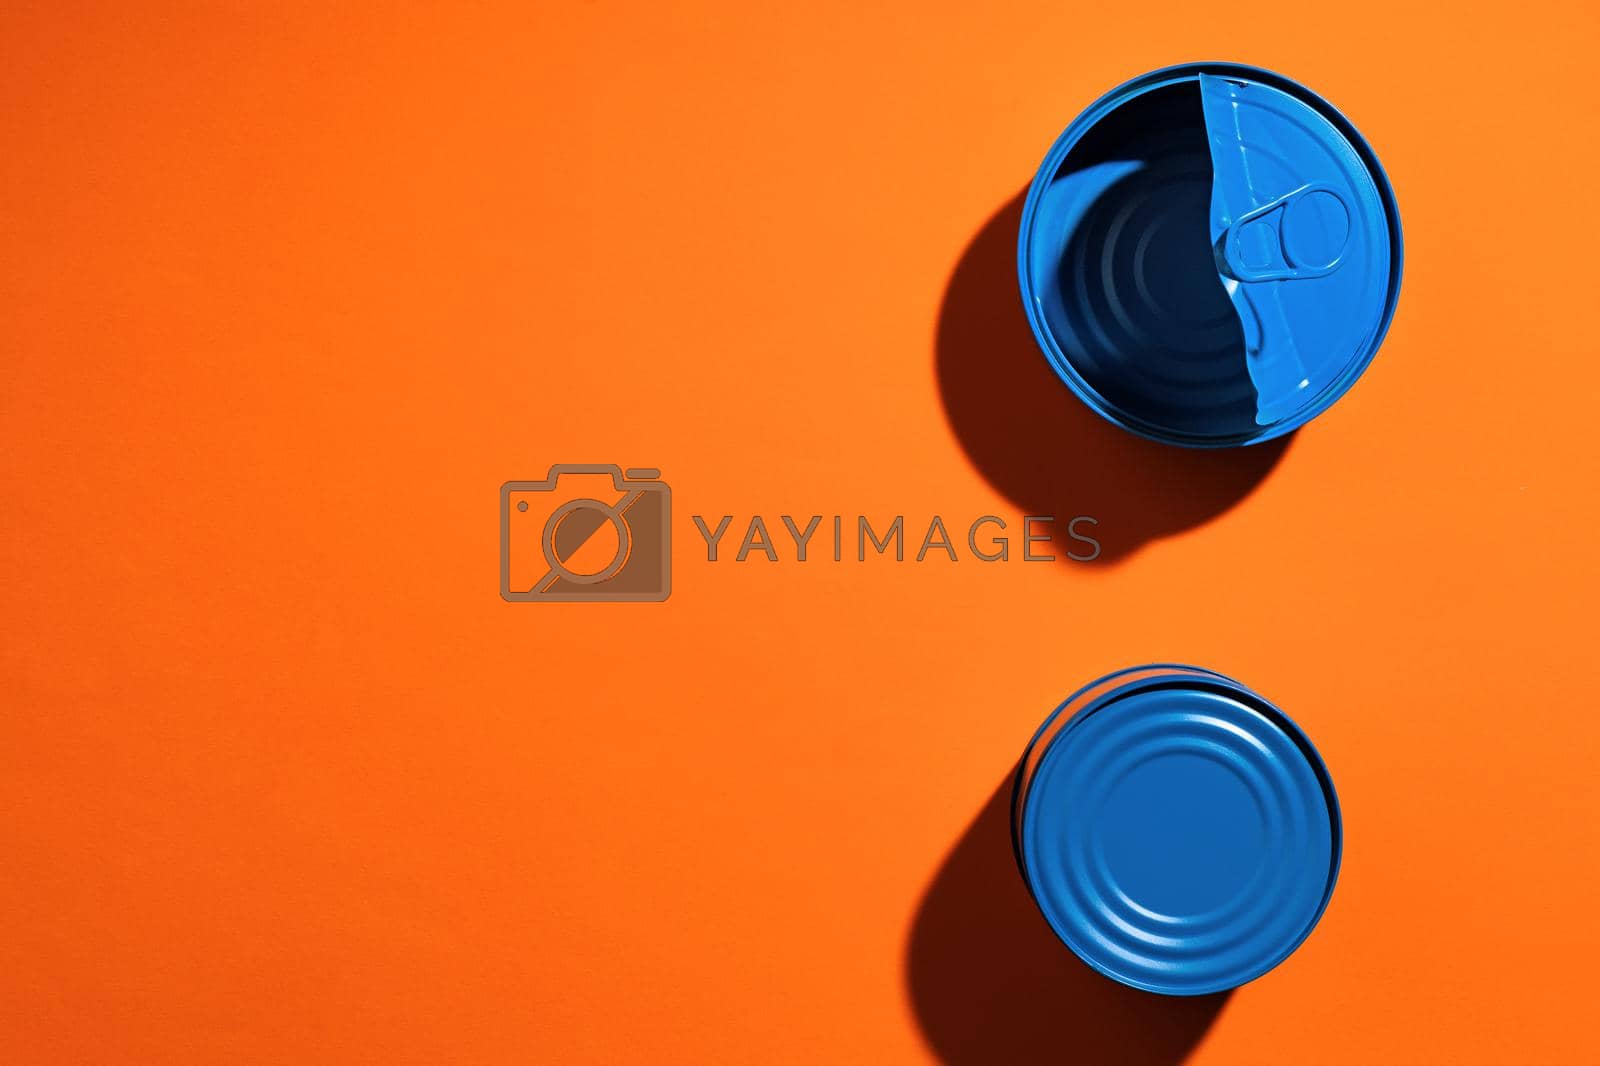 Royalty free image of Aesthetic concept with blue painted tin can on orange background by Fabrikasimf